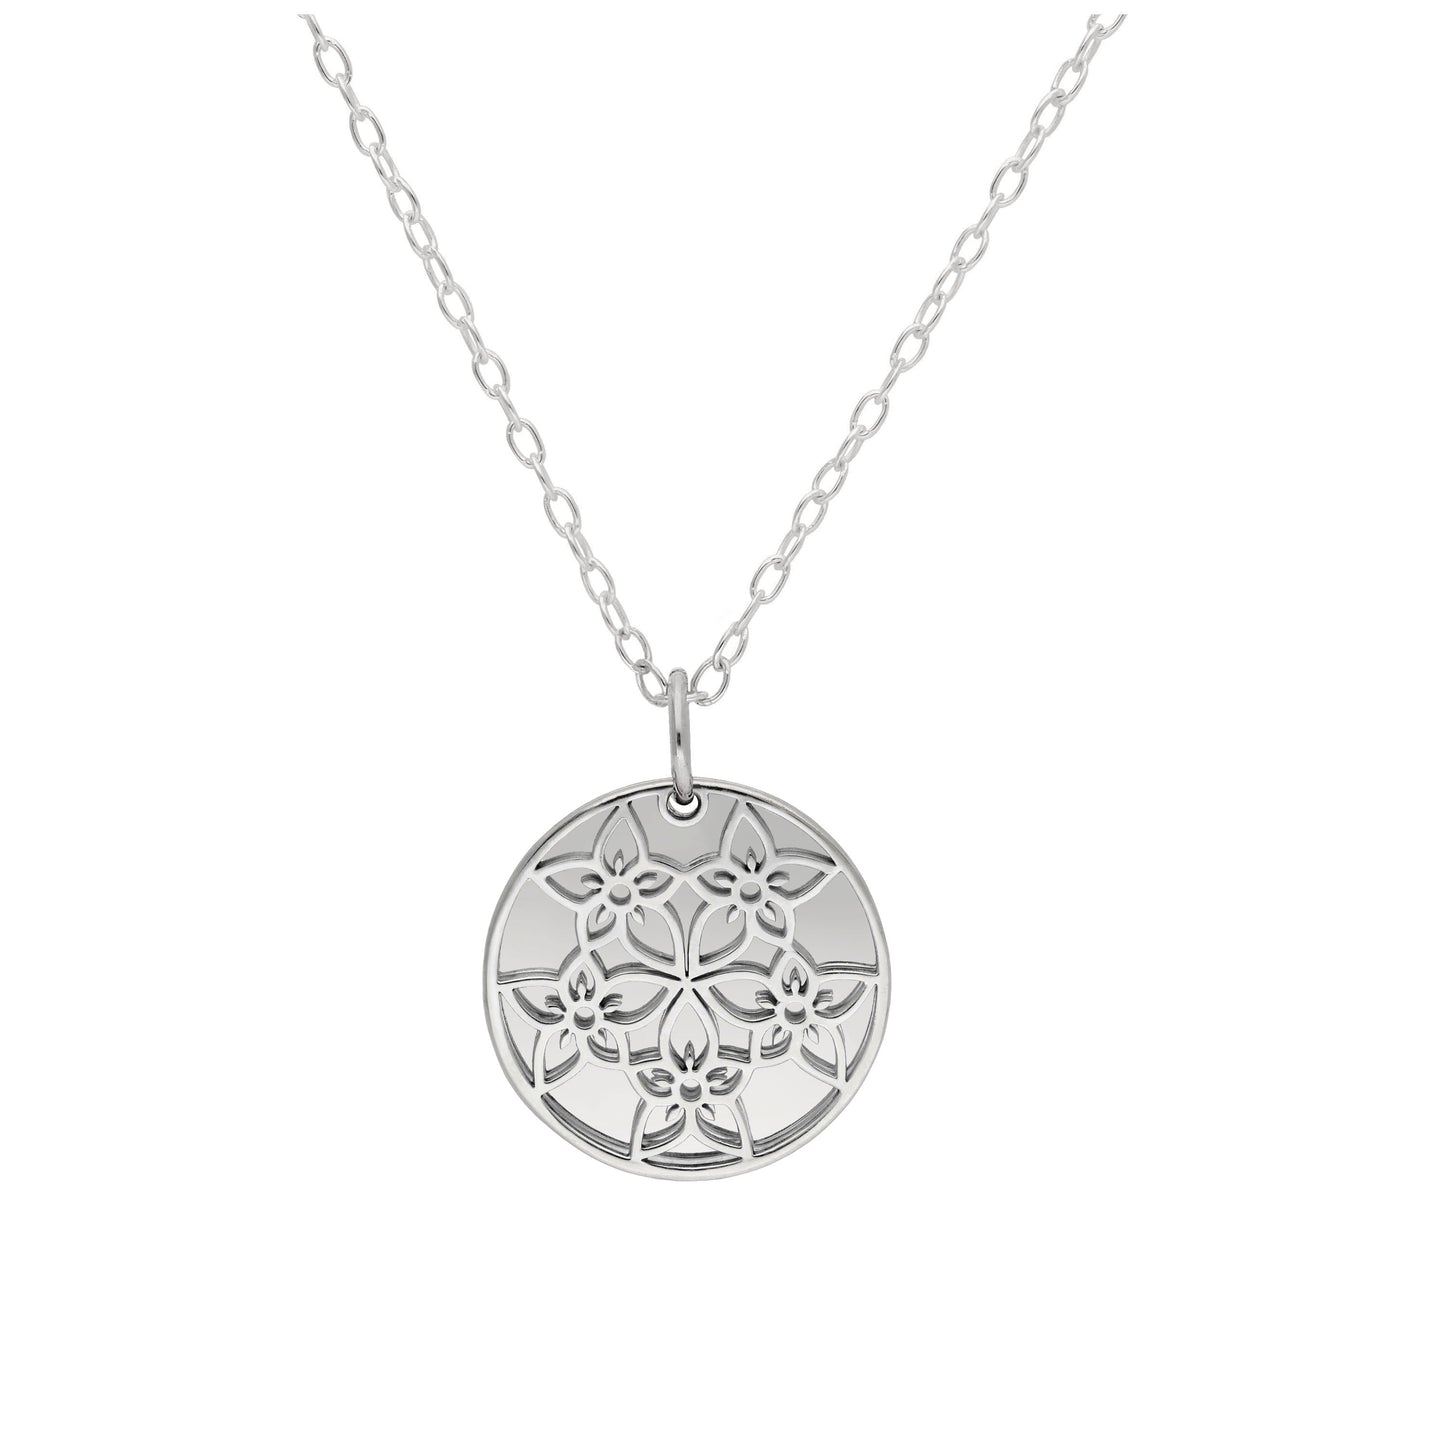 Sterling Silver July Larkspur Birth Flower & 13mm Engravable Tag Necklace 14 - 22 Inches